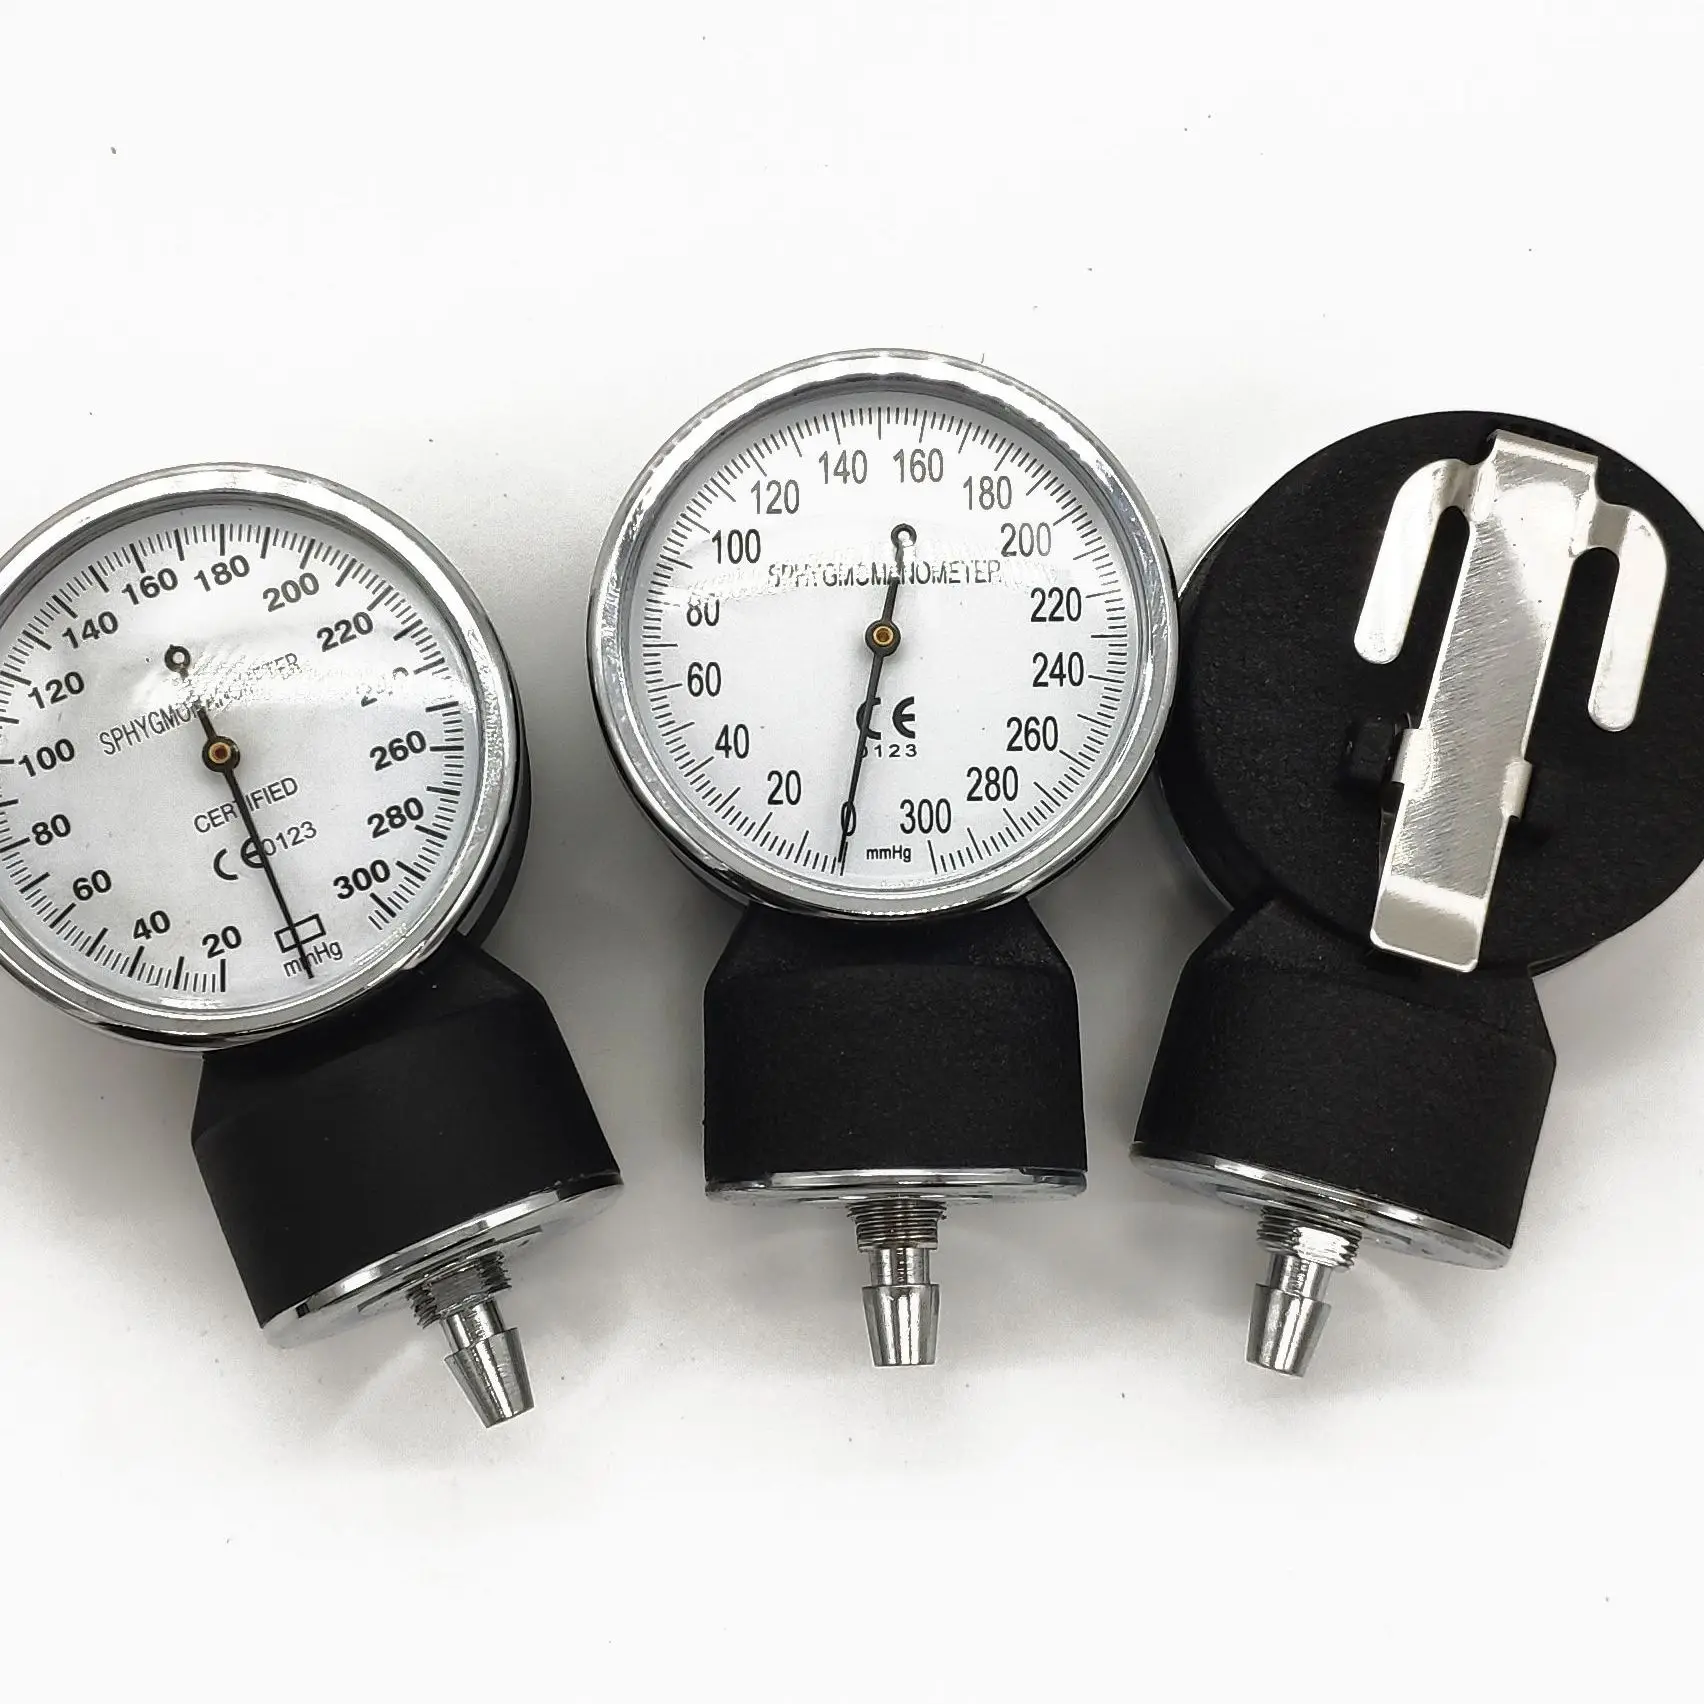 

Manual Blood Pressure Monitor Gauge Meter Bulb Accessory for Medical BP Cuff Arm Aneroid Sphygmomanometer Patient